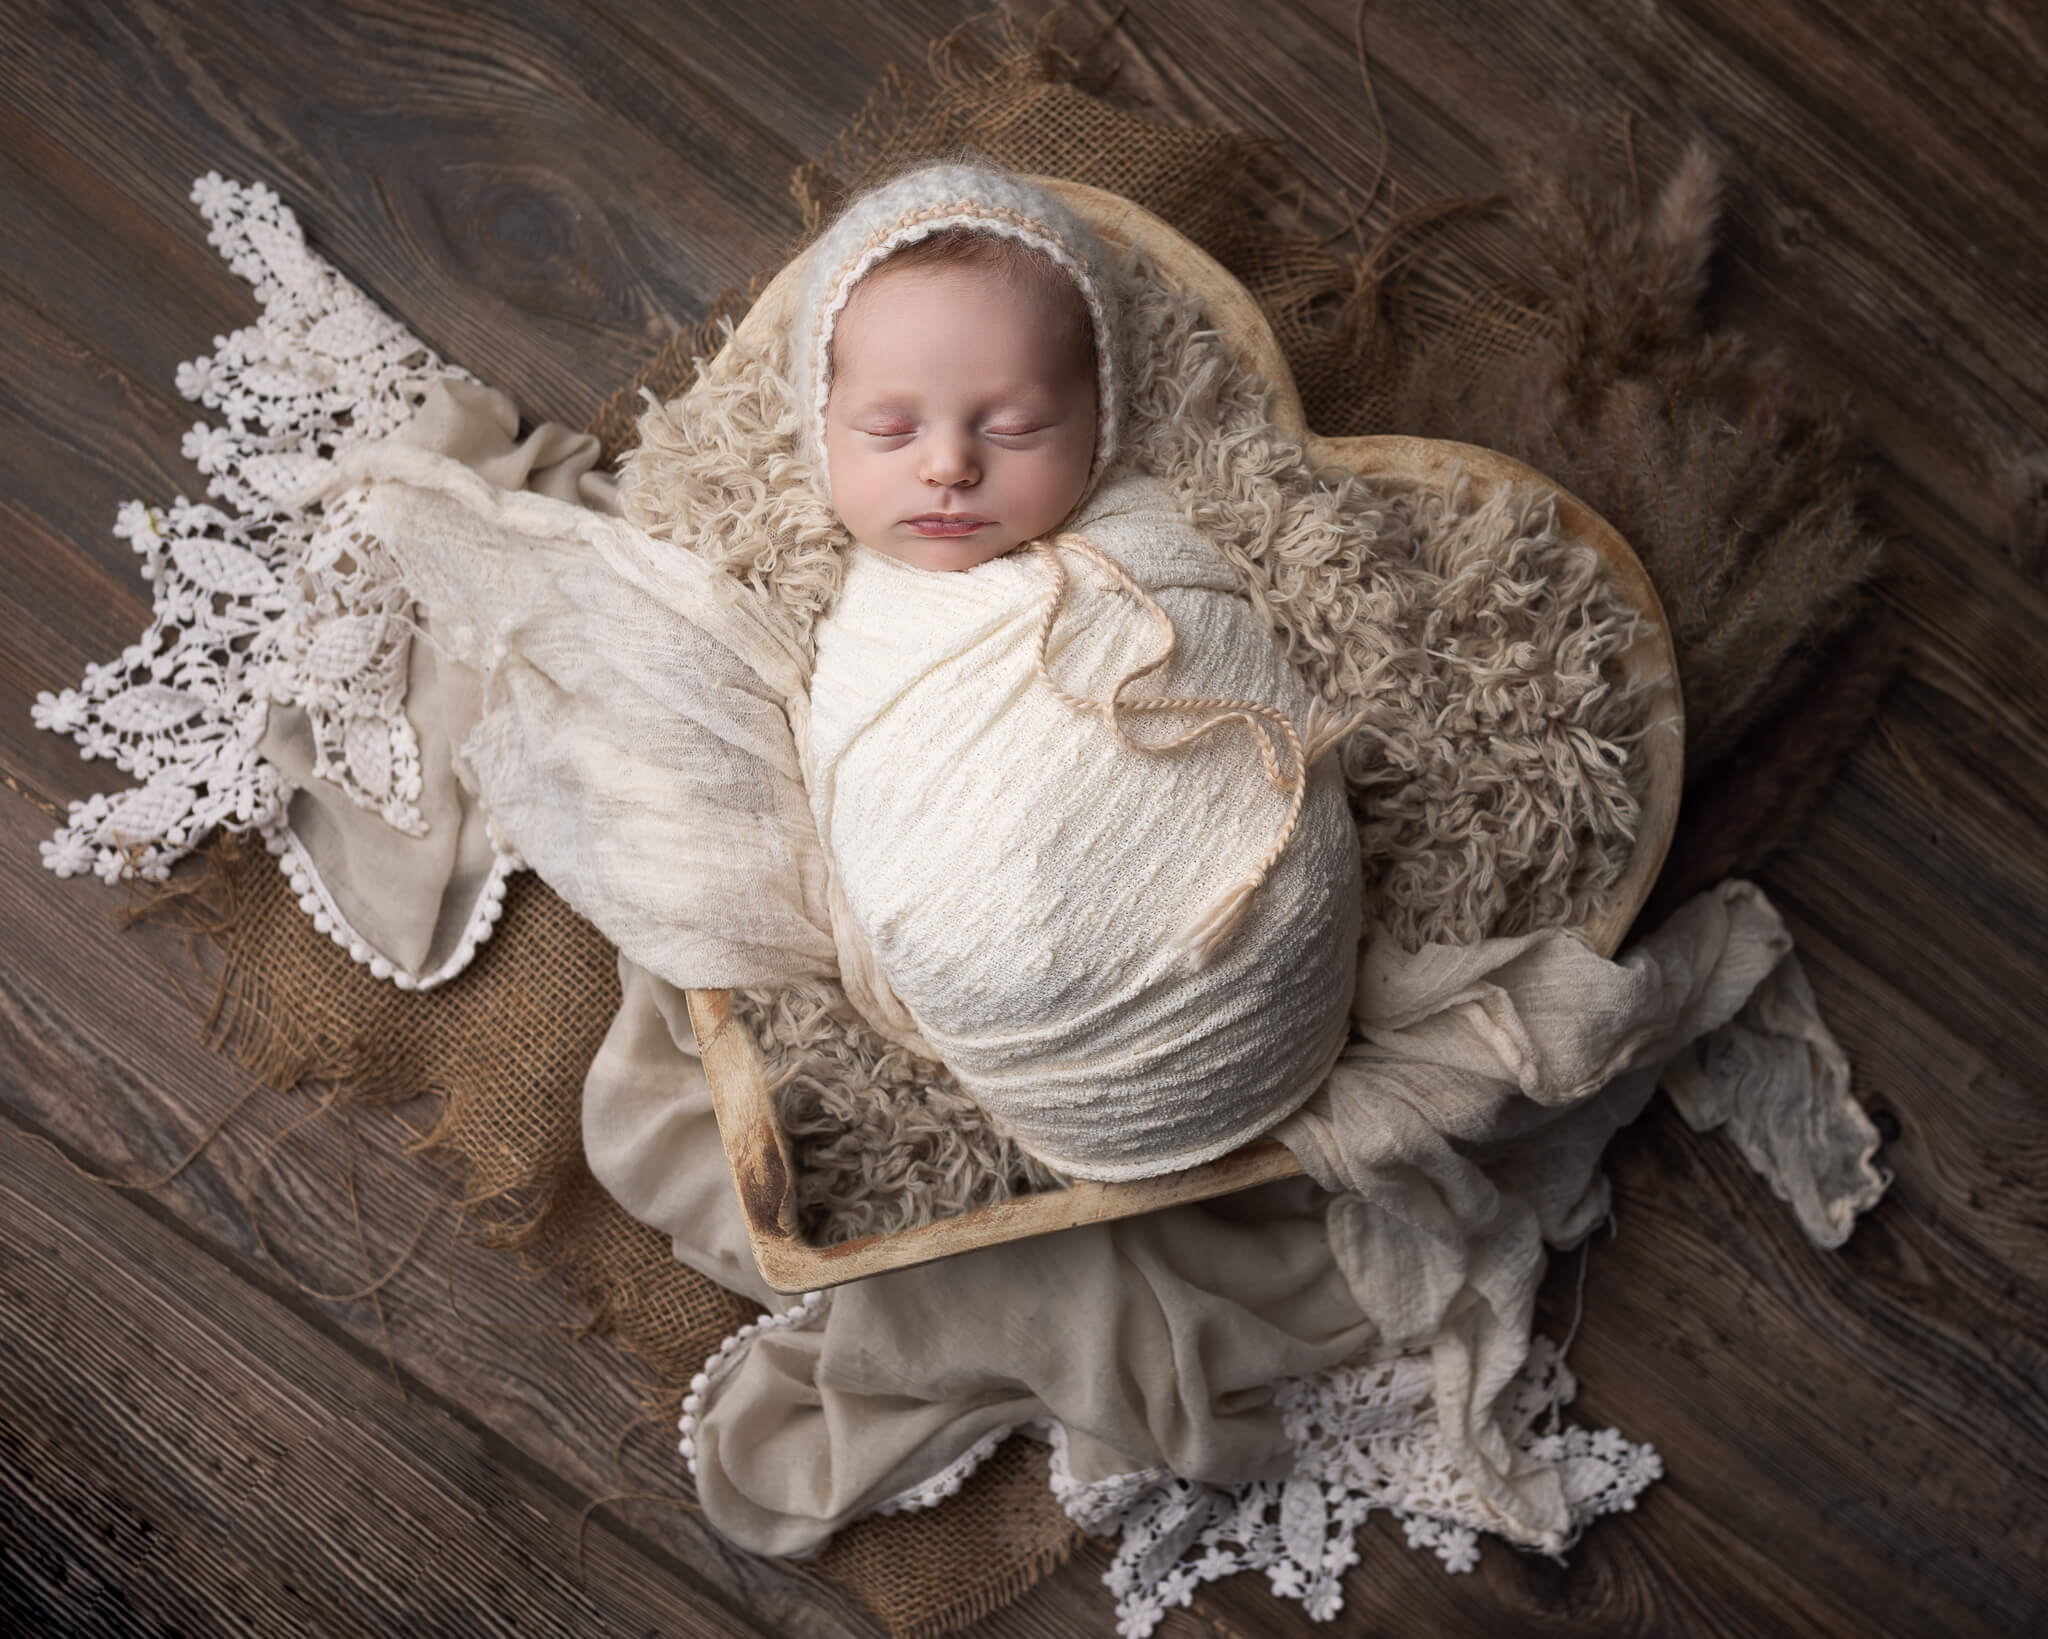 benefits of infant and newborn massage  in blog photo of sleeping newborn in white swaddle in heart basket